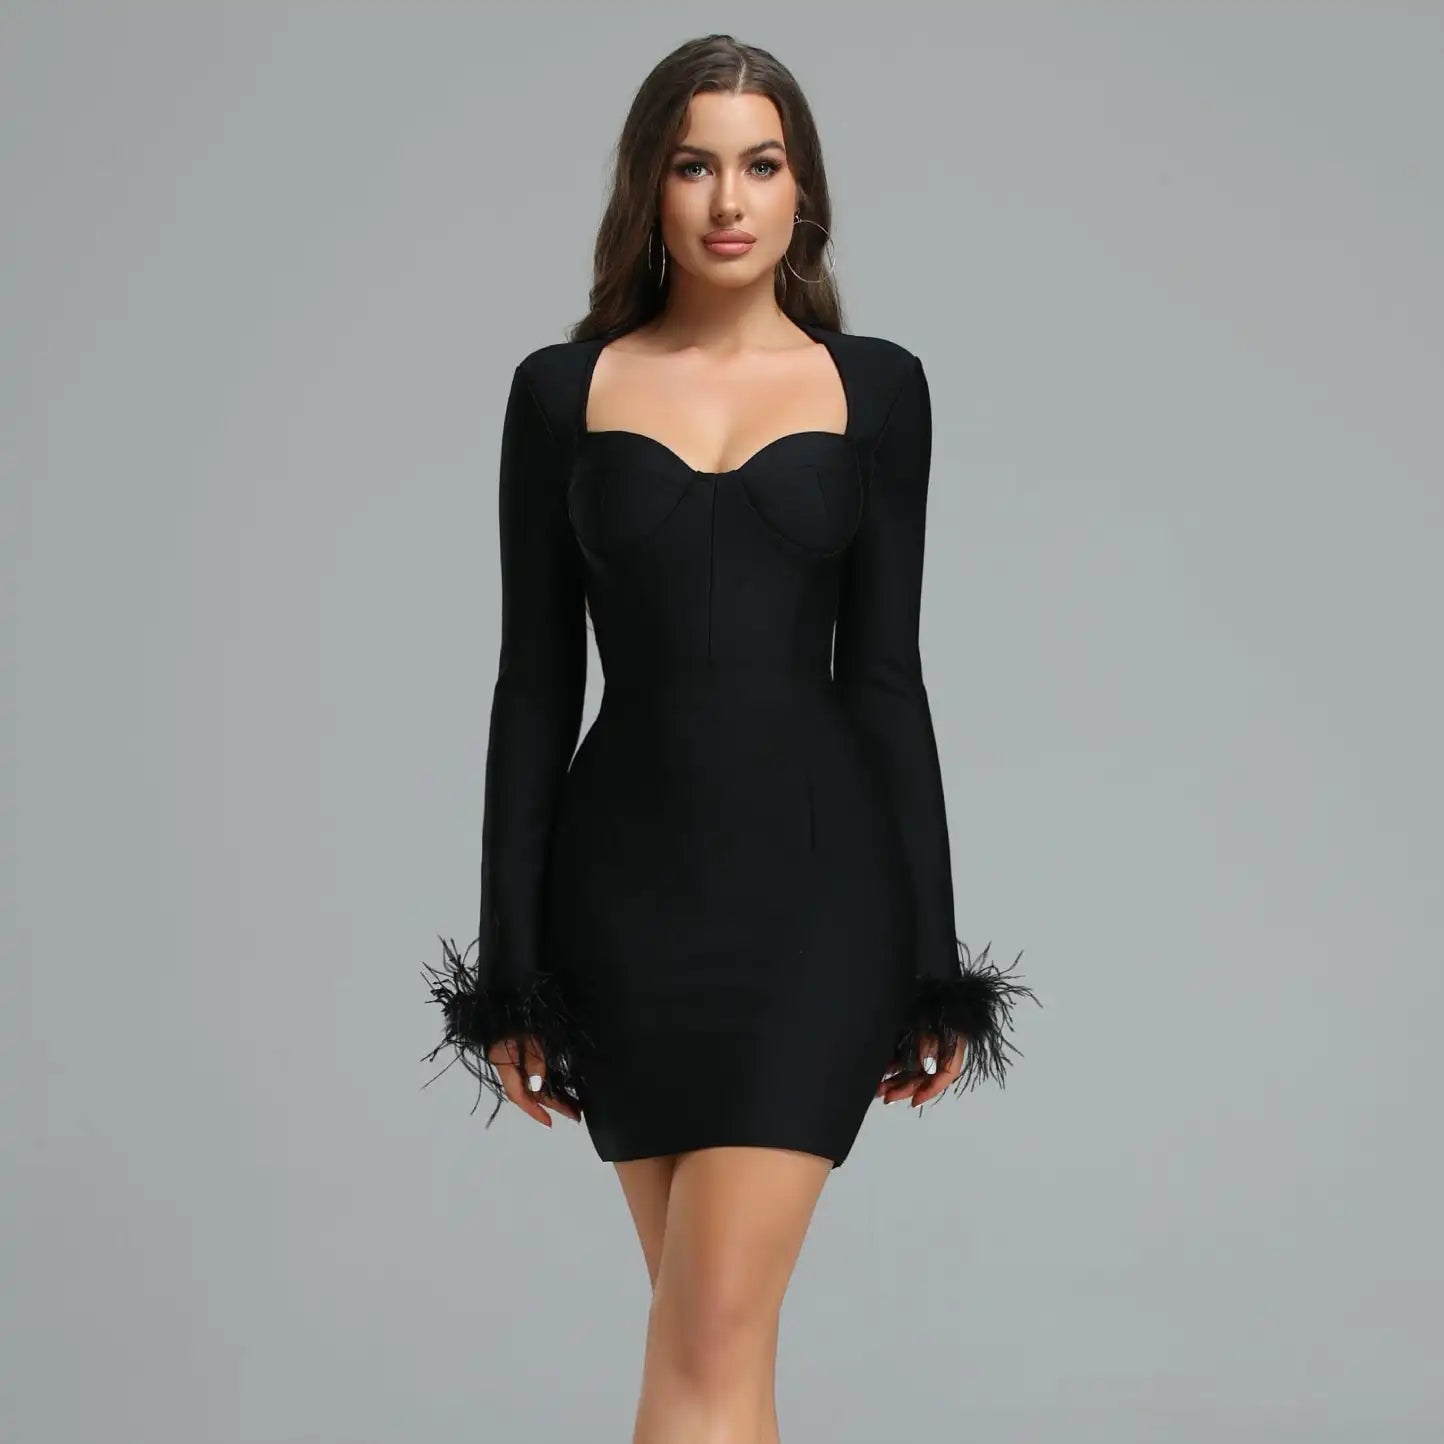 Winter Women Long Sleeve Bodycon Mini Dress with Feathers